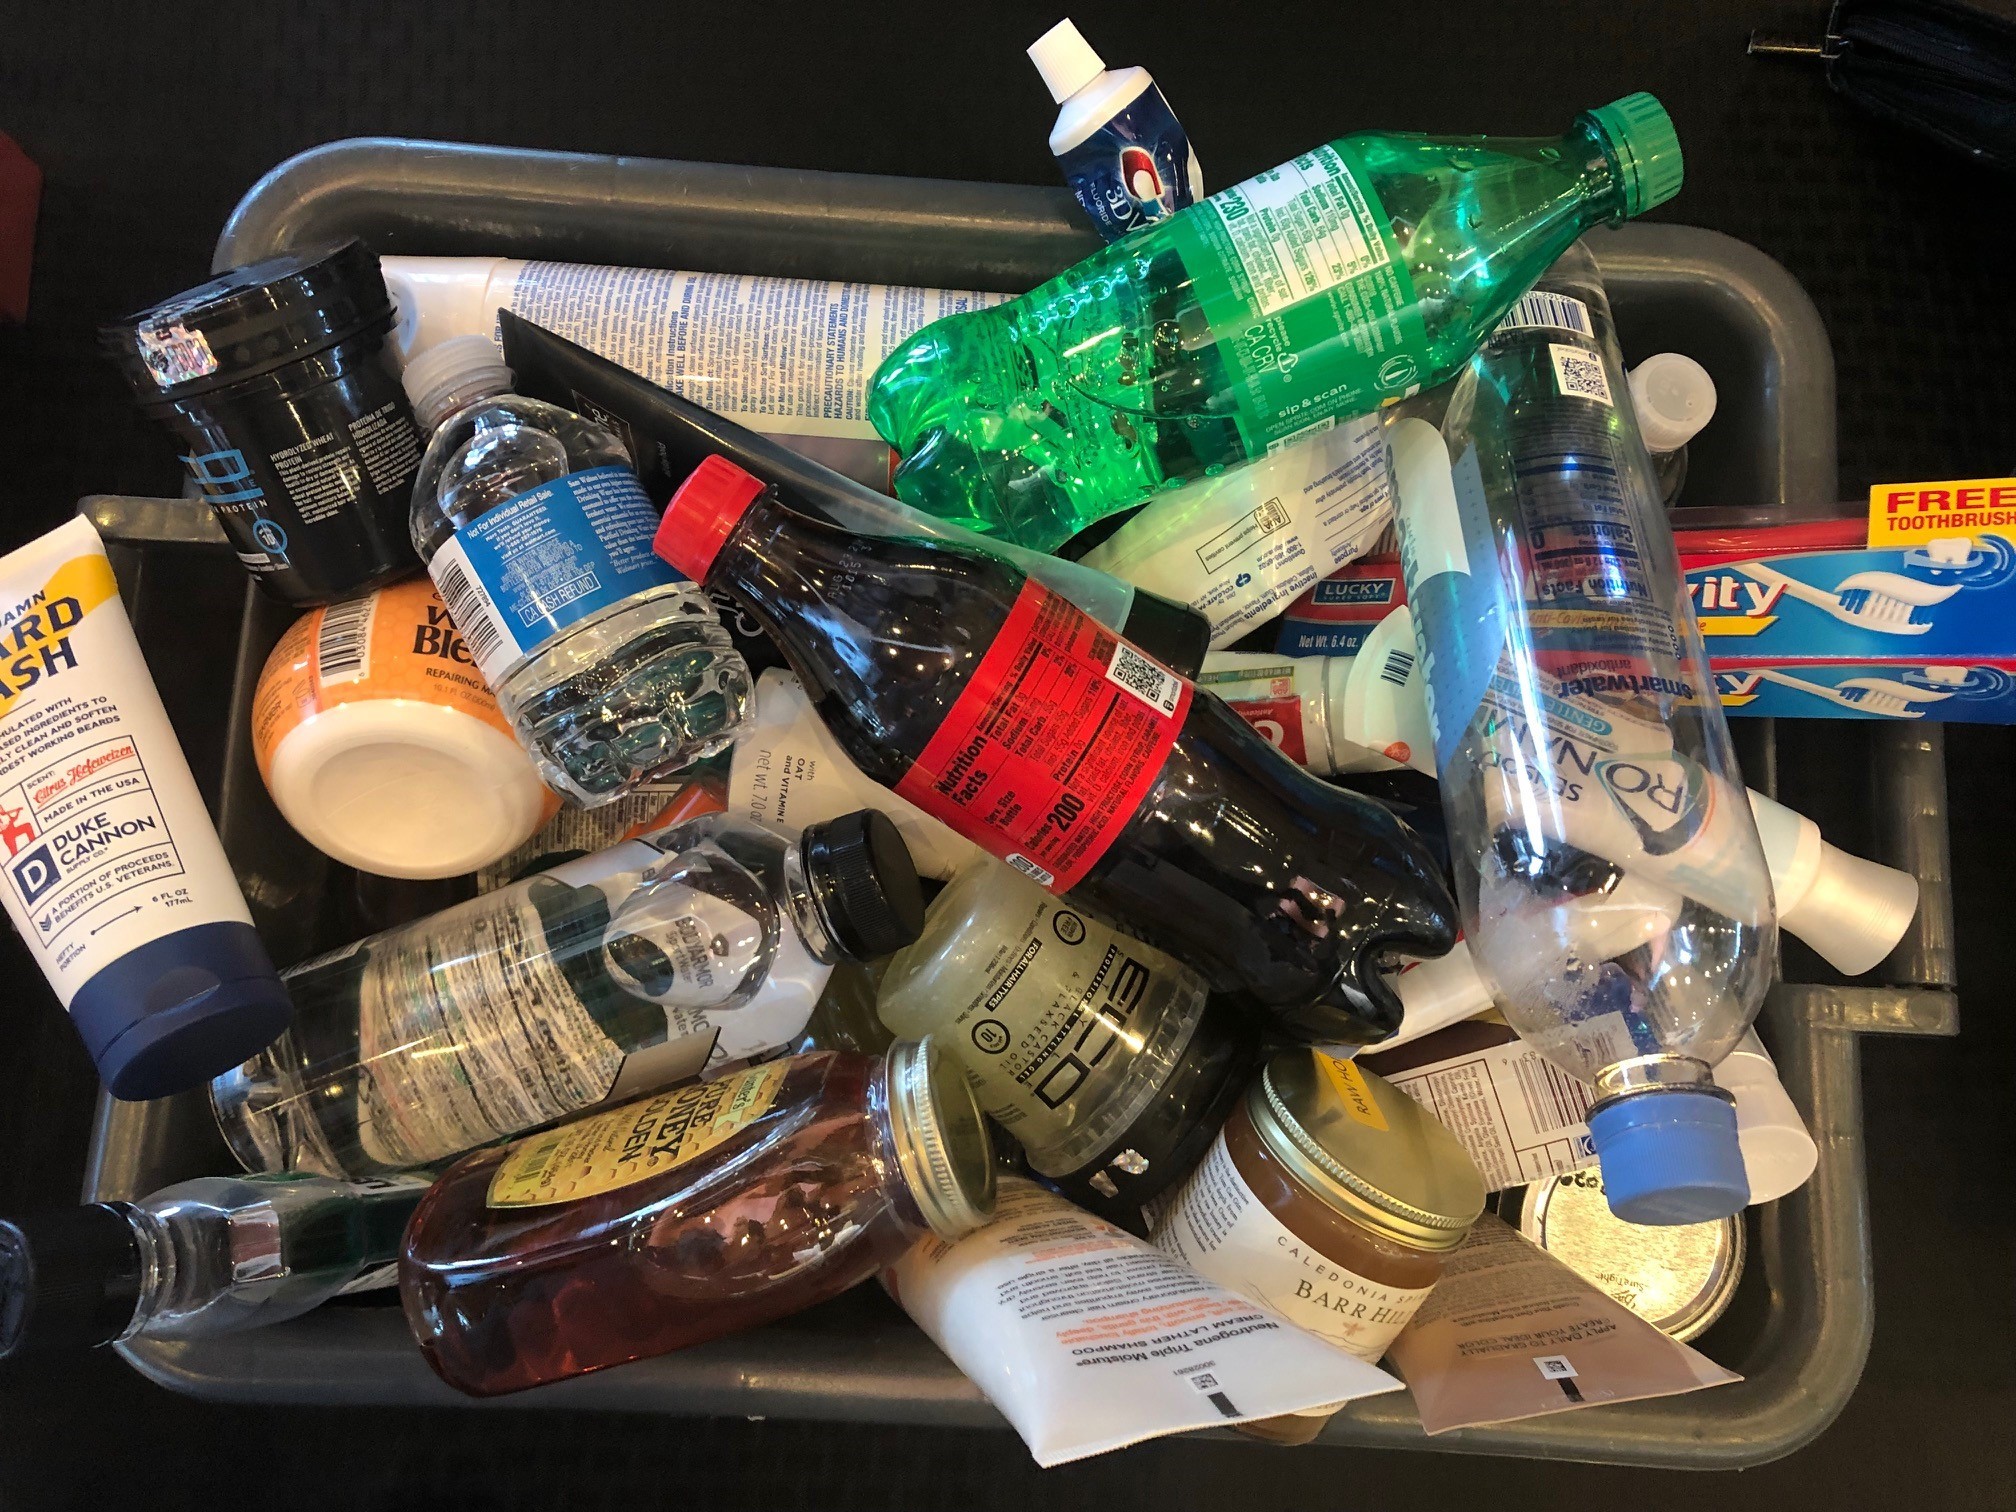 Travelers are not permitted to bring liquids, gels or aerosols larger than 3.4 ounces through a security checkpoint. These items have been surrendered by travelers at checkpoints. (TSA photo)